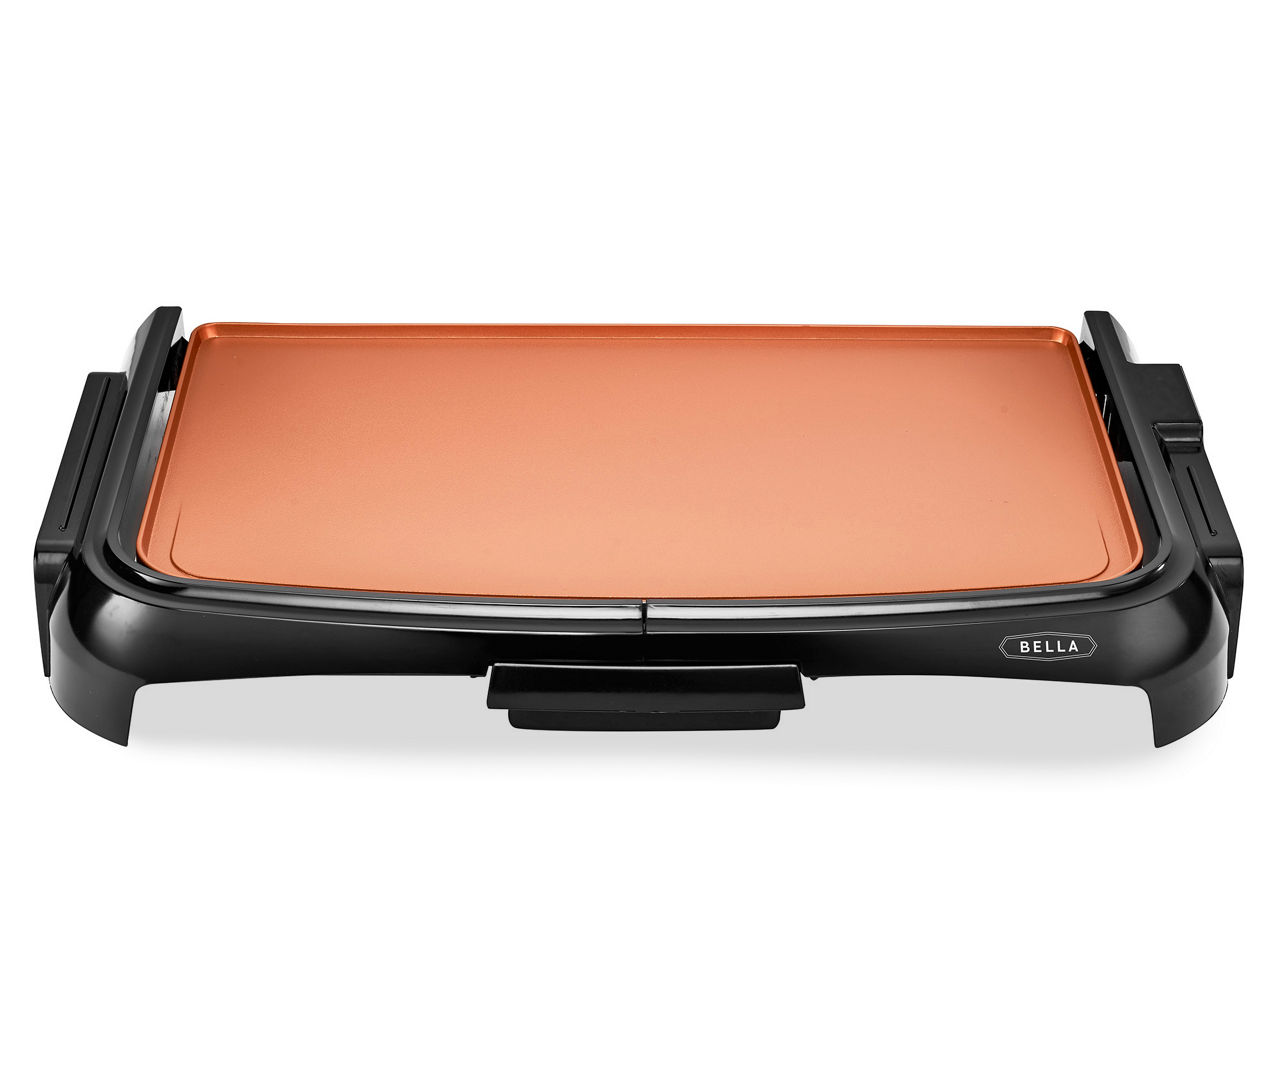 Starfrit Eco Copper Electric Griddle 